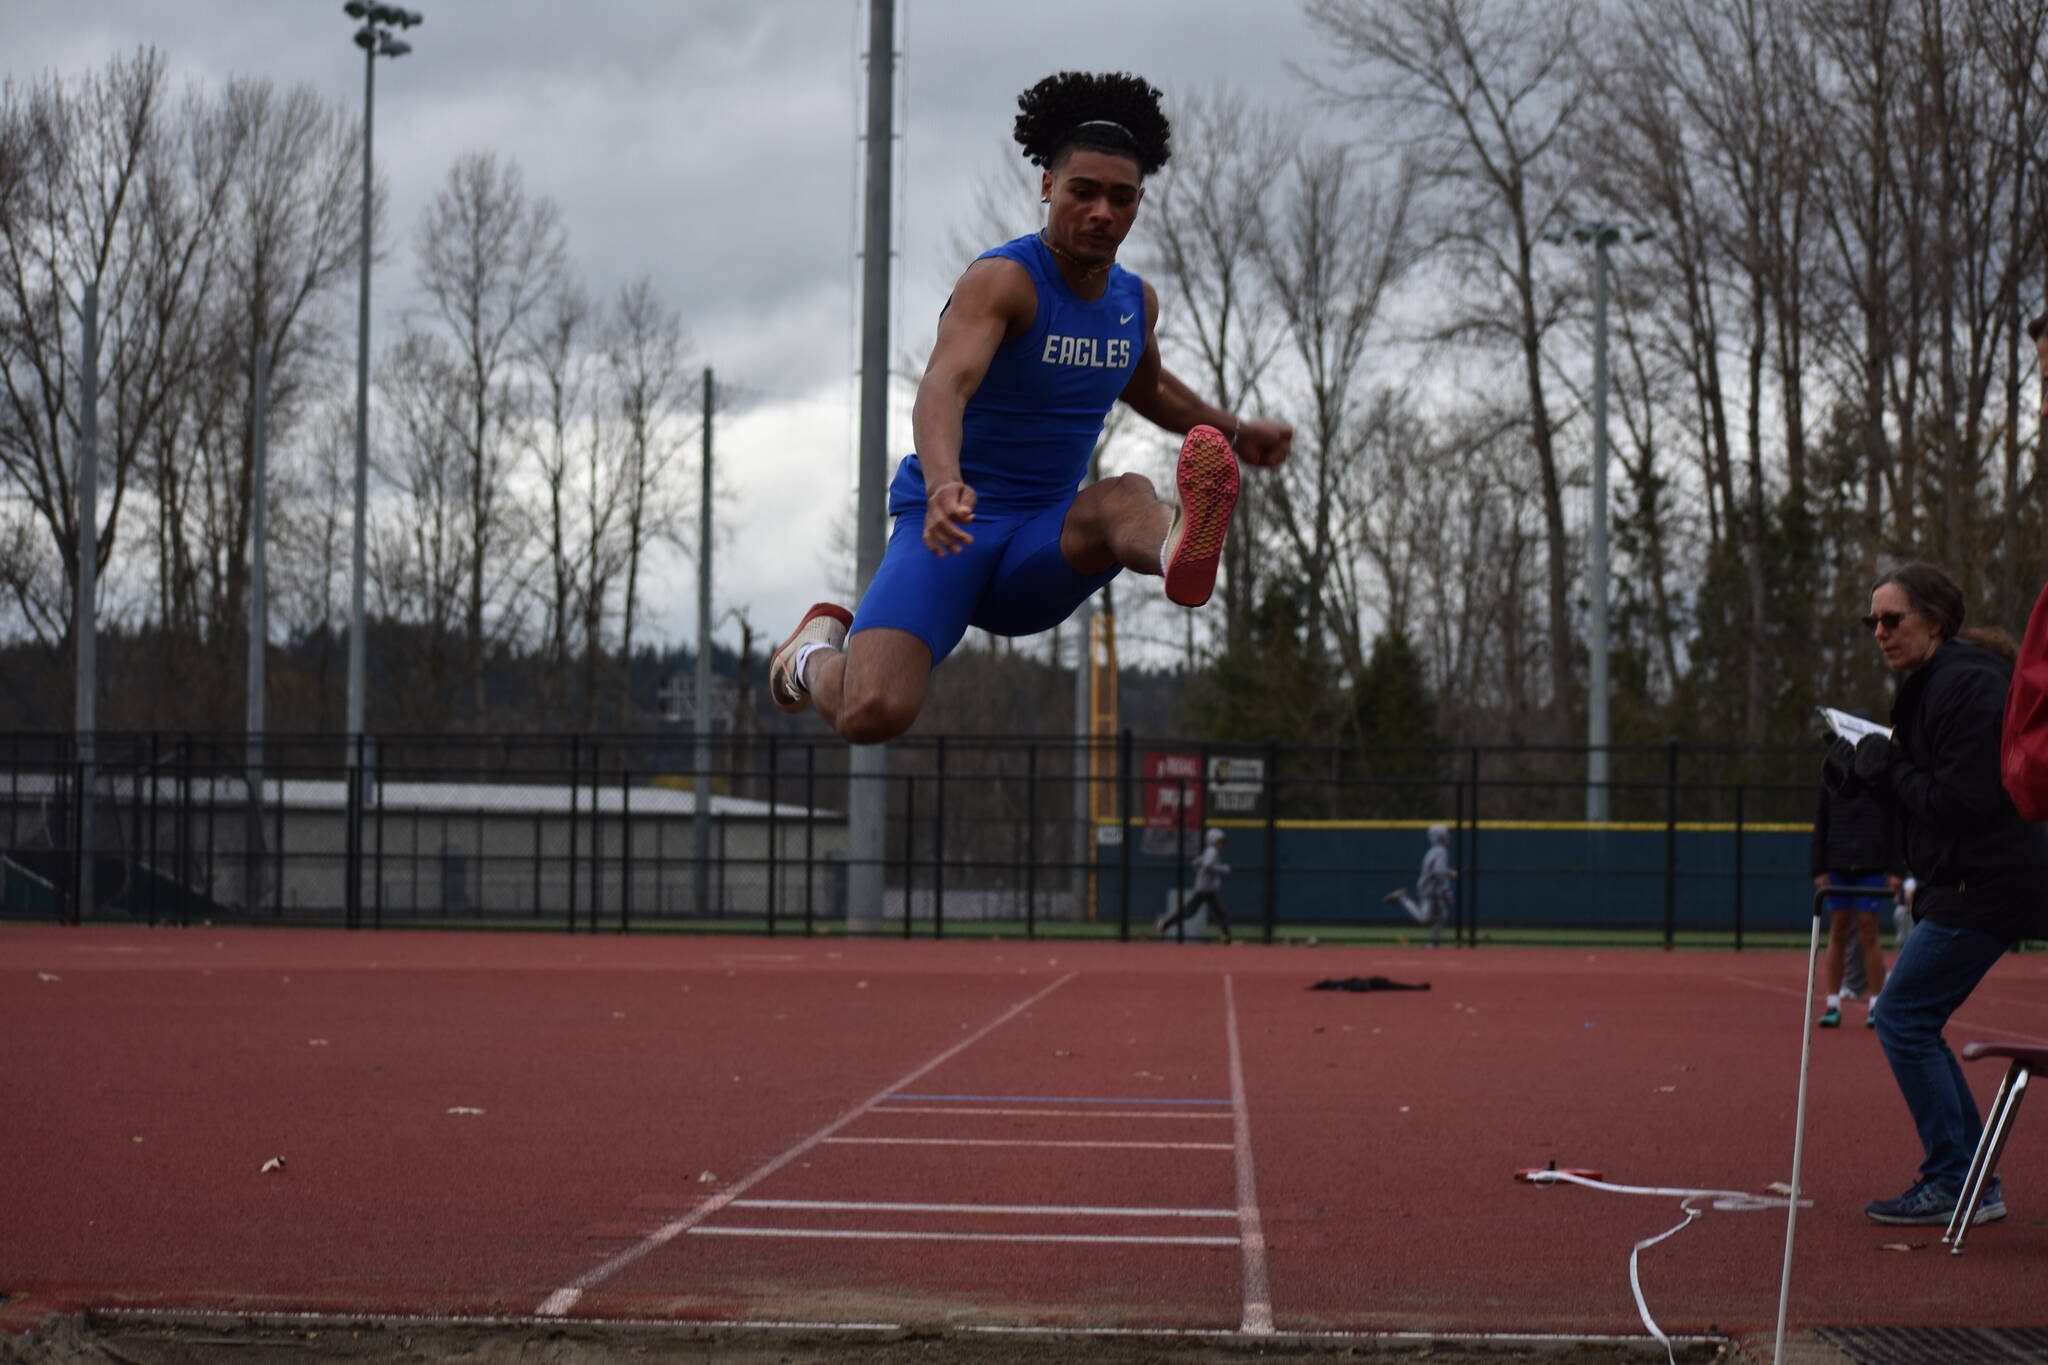 Eagle Julien Fortin takes flight during his long jump. Ben Ray / The Mirror